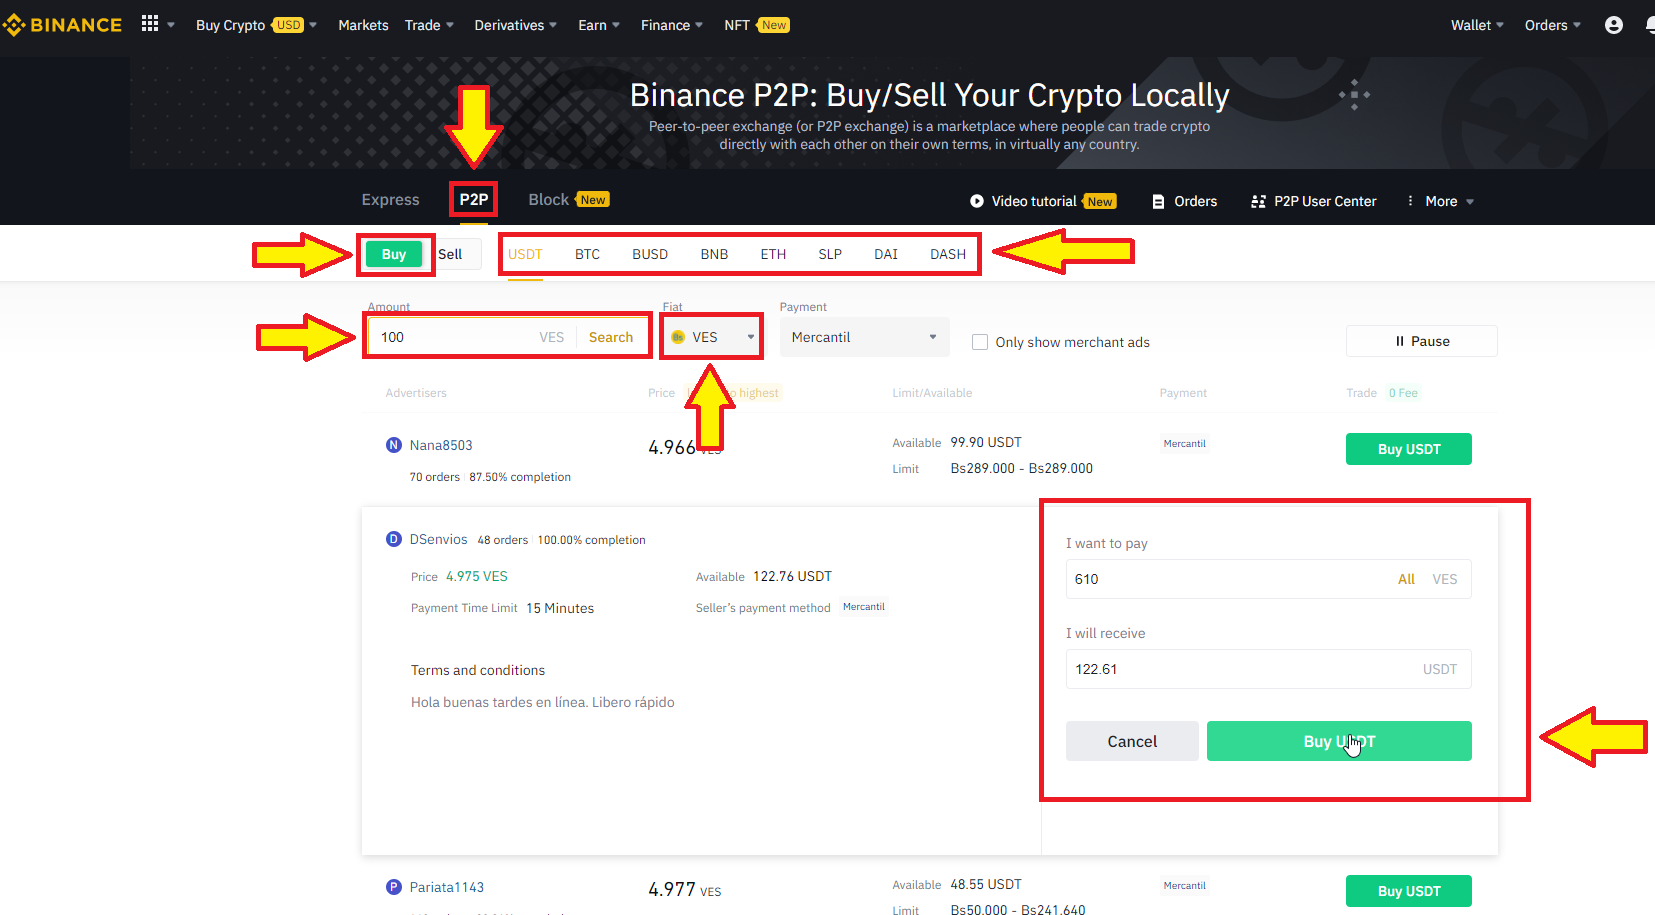 Buy governance ZIL crypto in P2P with a verified account on Binance